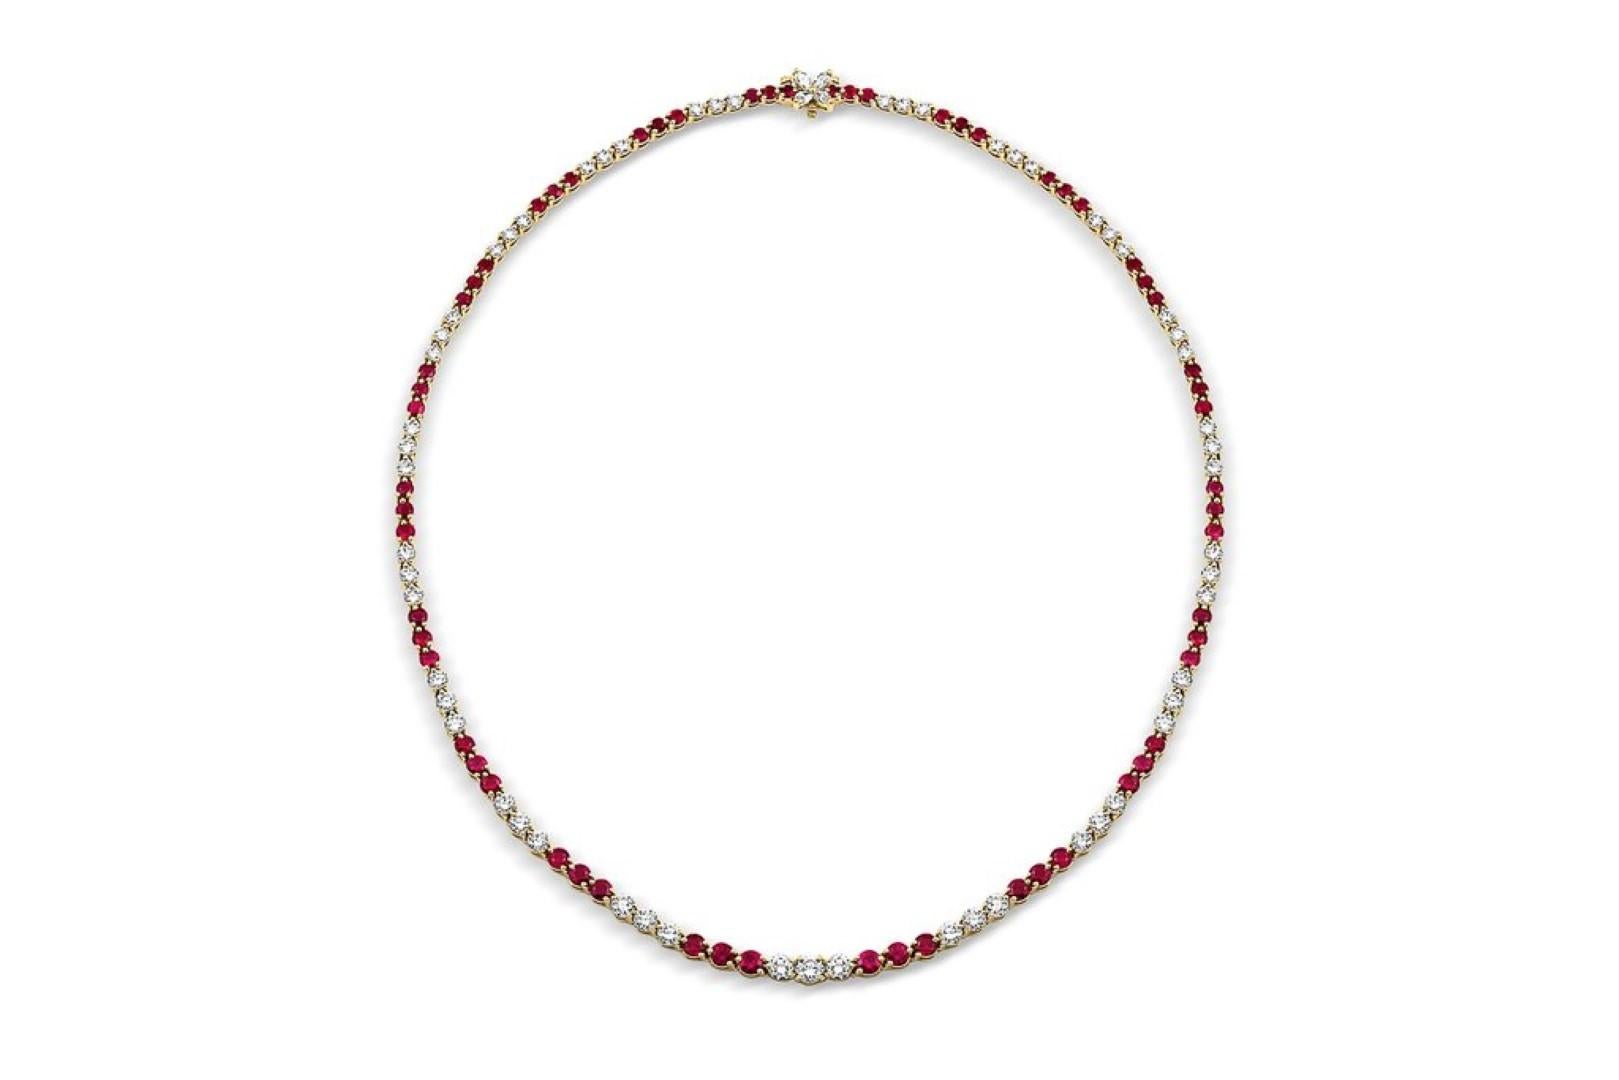 Gorgeous Tiffany & Co. graduated ruby, diamond and 18k yellow gold necklace from the Victoria Collection. There are approximately 6.75cts of round faceted rubies and approximately 5.7cttw of round brilliant and marquise cut diamonds.